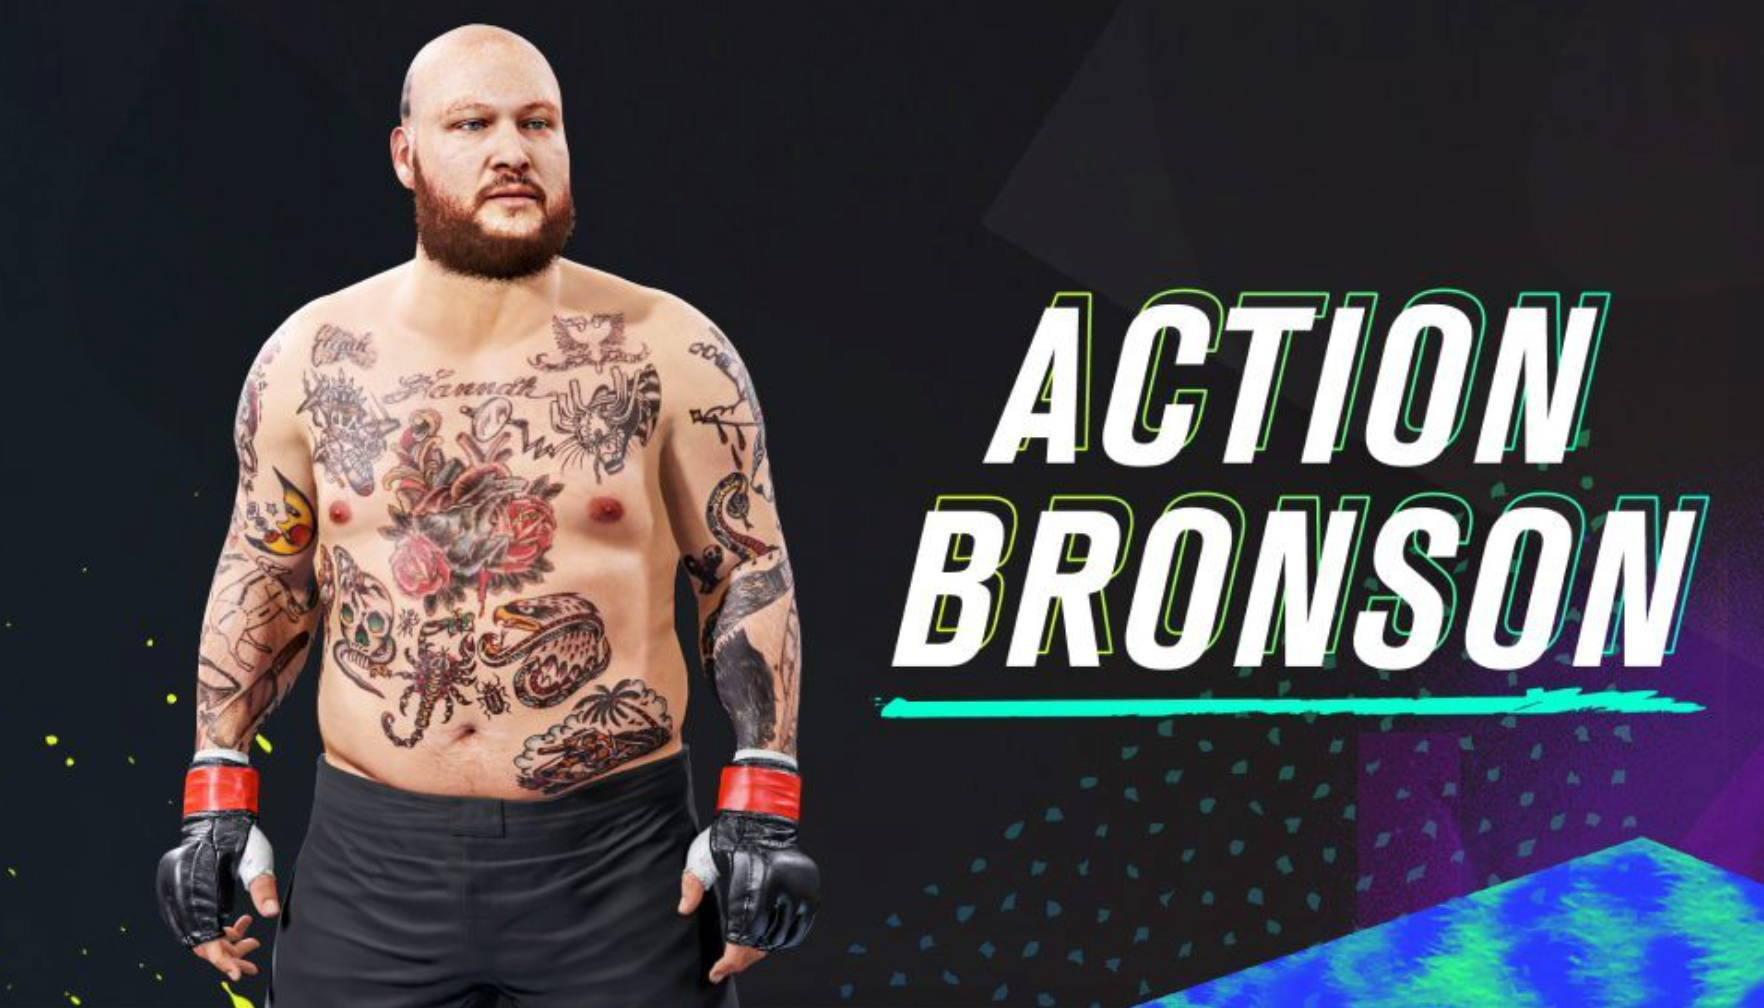 Action Bronson joins the UFC 4 roster